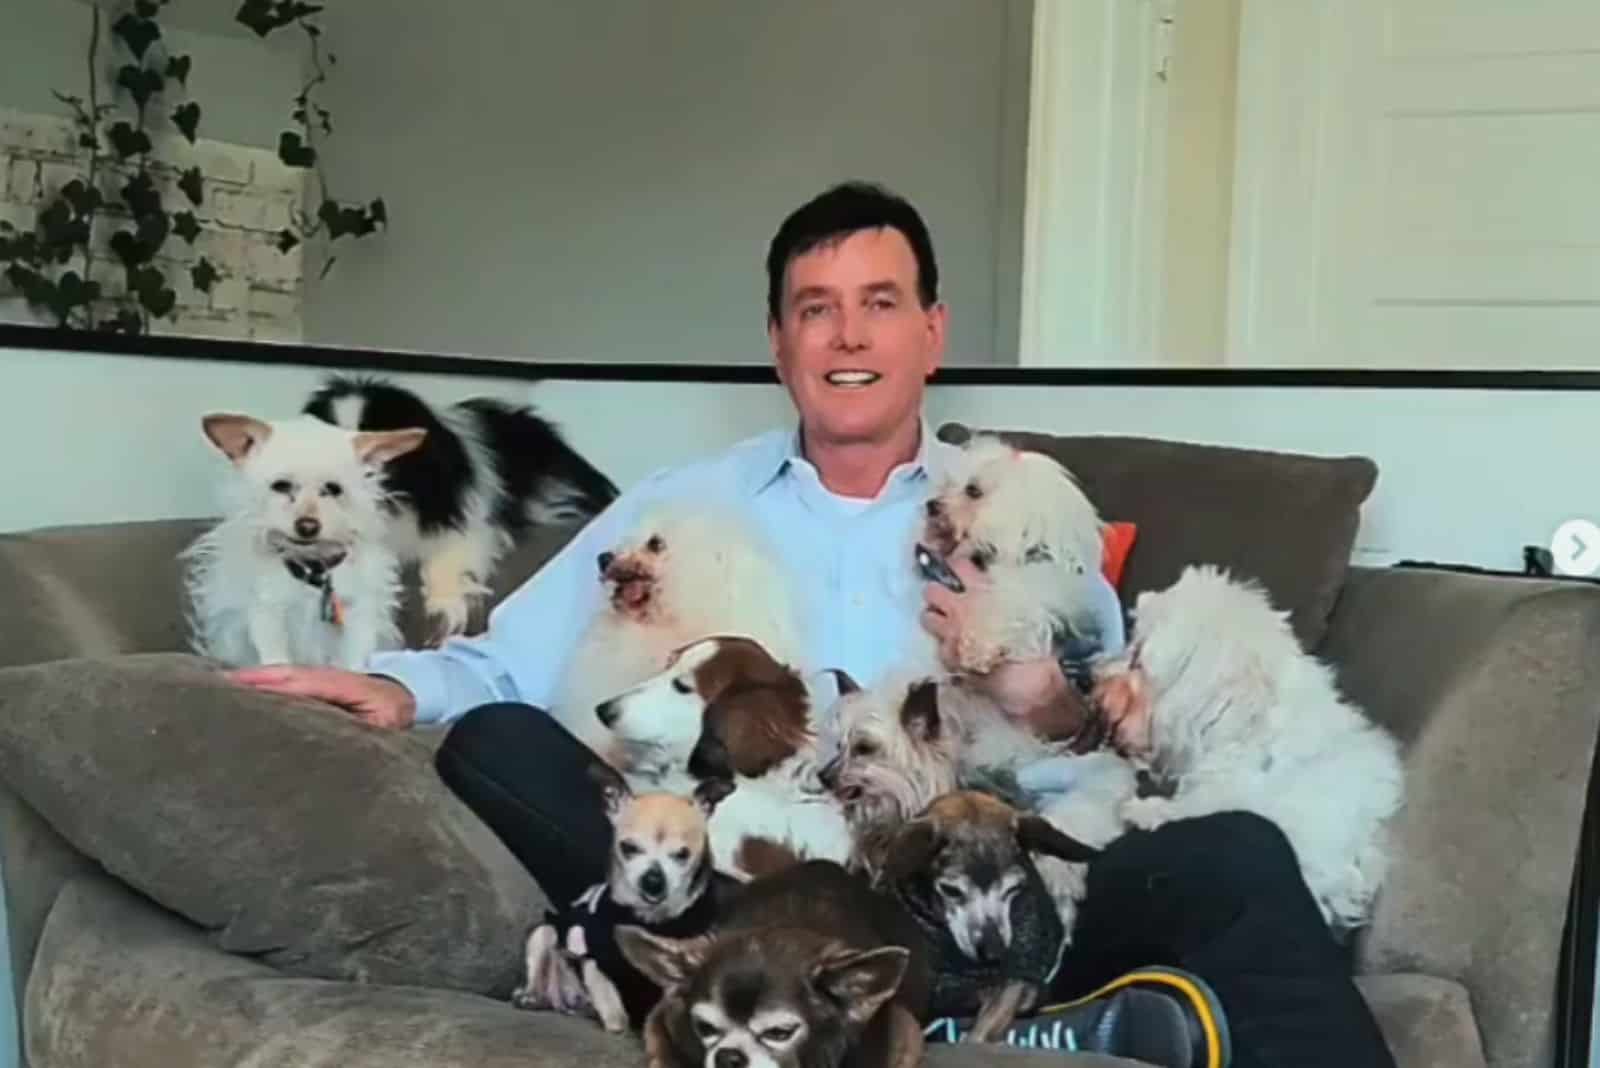 This Kind Man Adopts Unwanted Senior Dogs And It’s Too Pure For This World